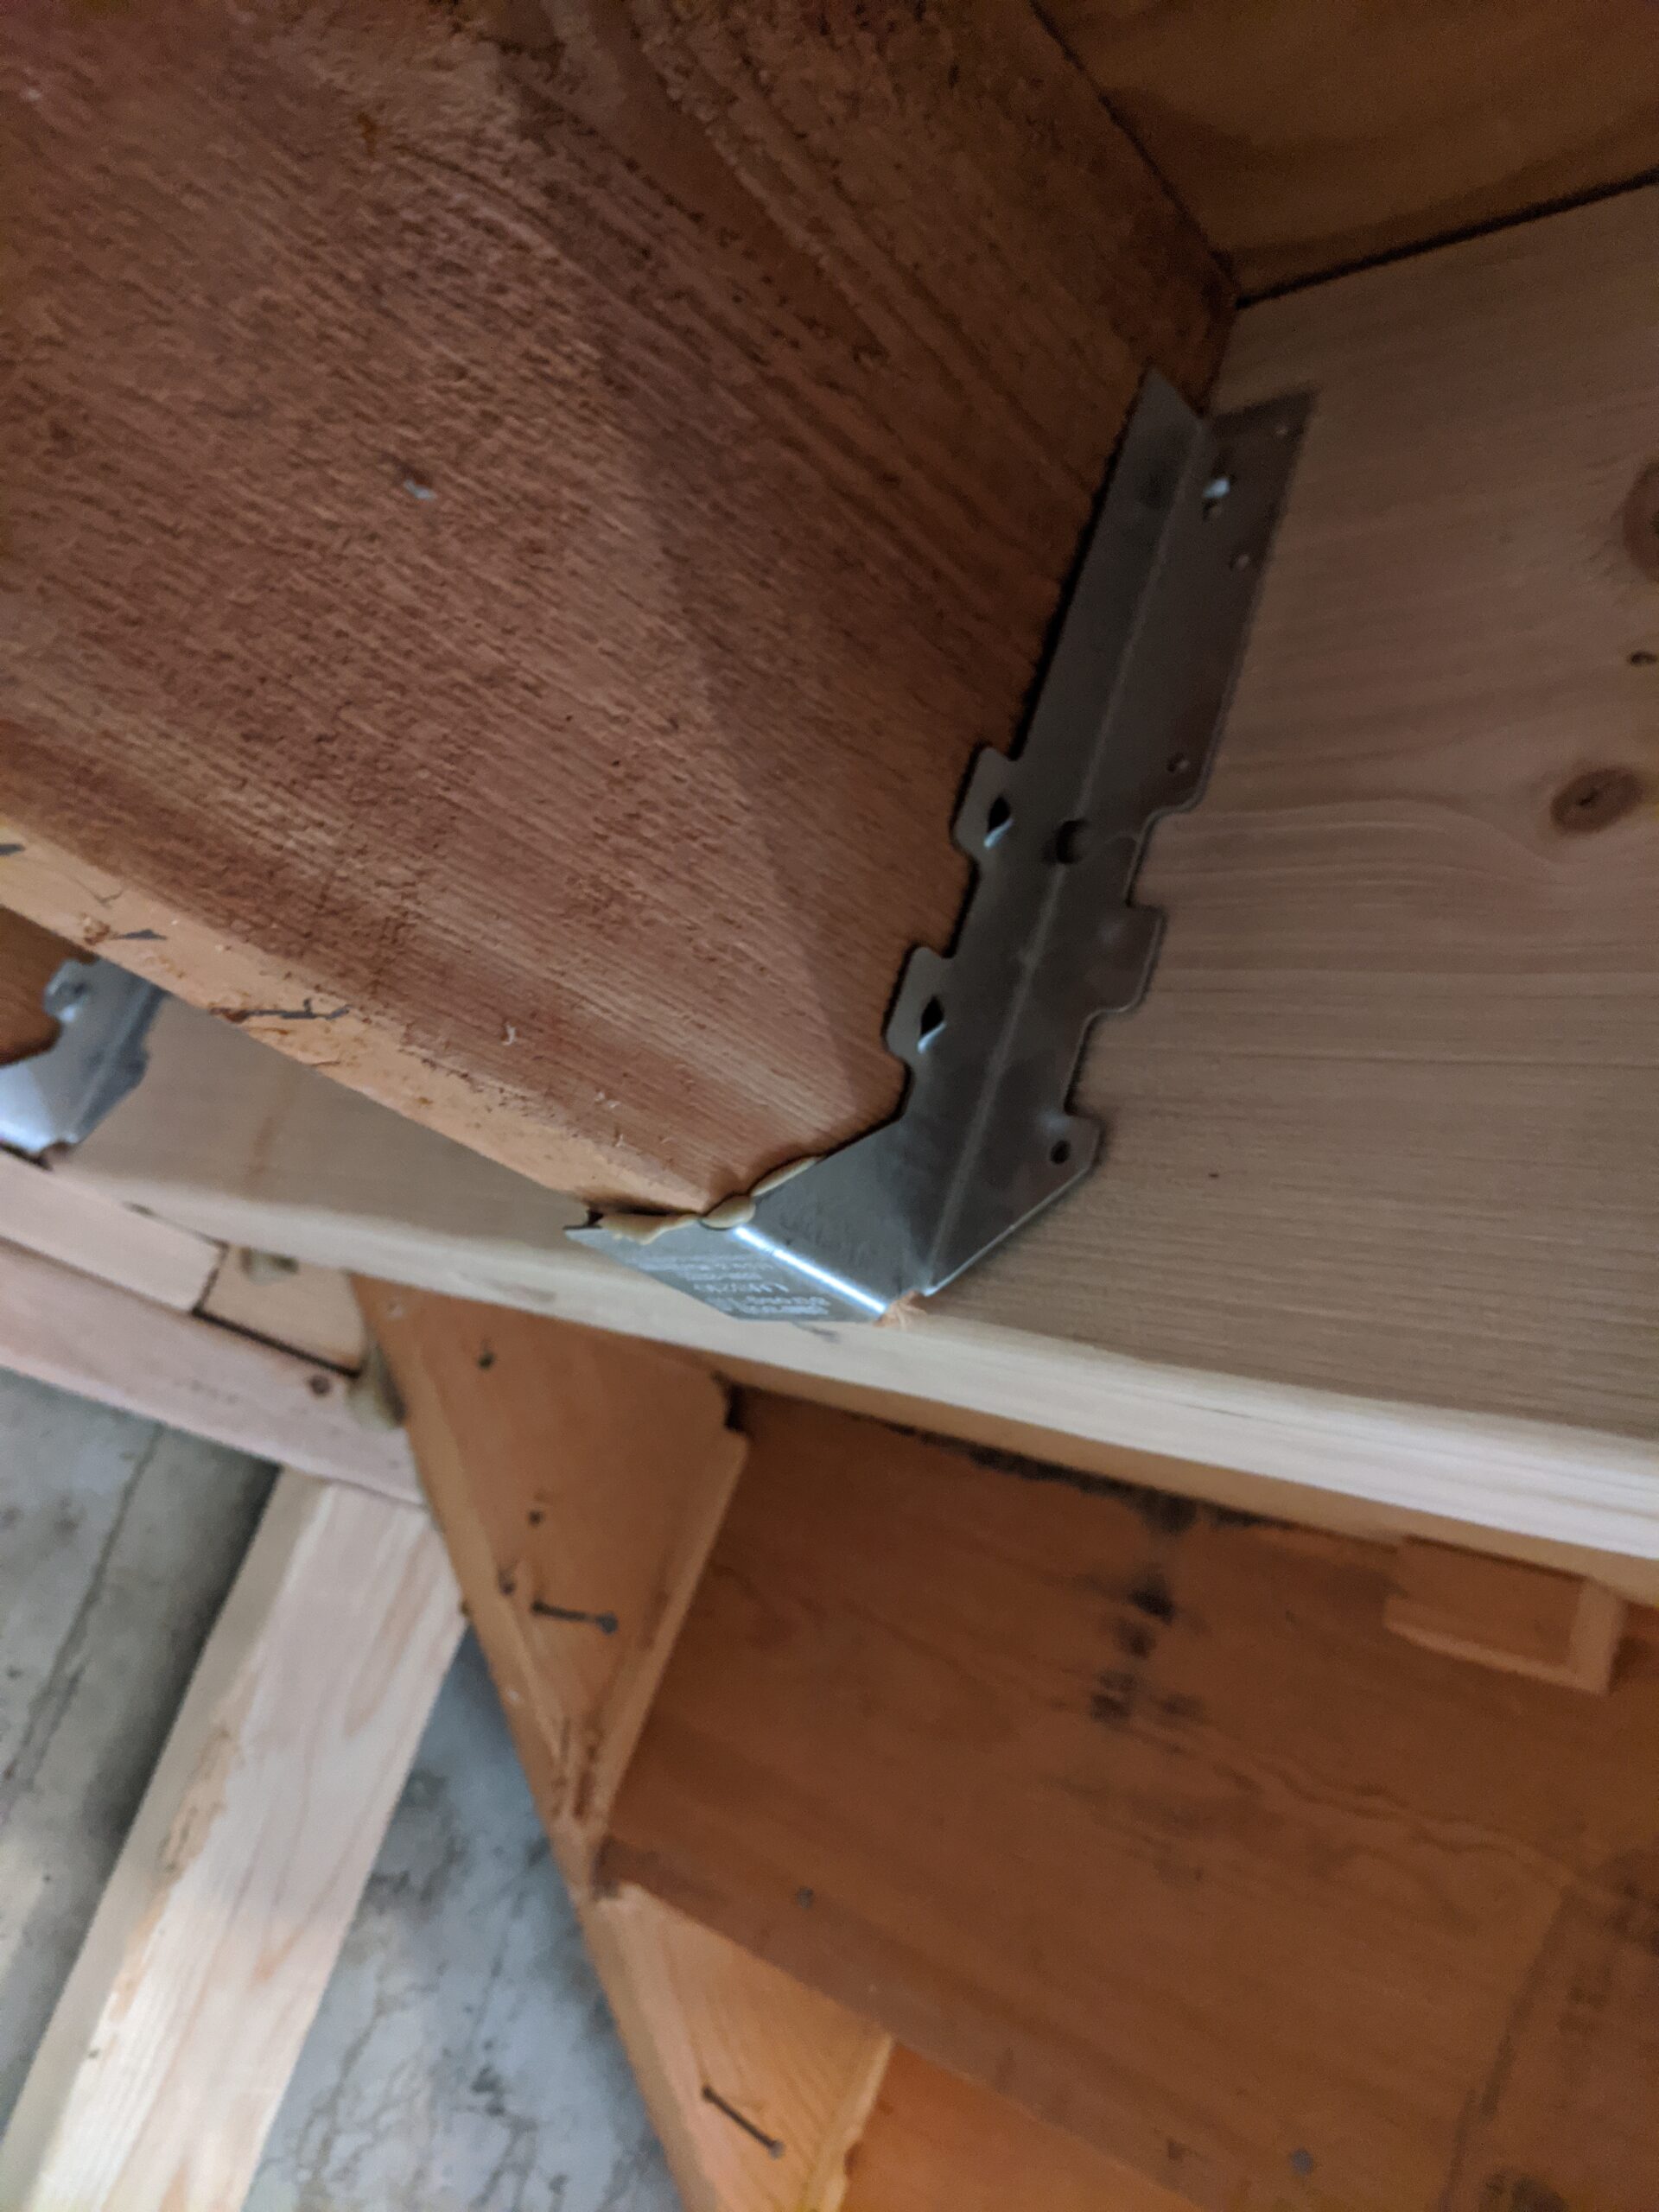 The engineer’s structural plans detailed where to attach specialized hardware, like these hangers to secure the stairs to the perpendicular floor joists.